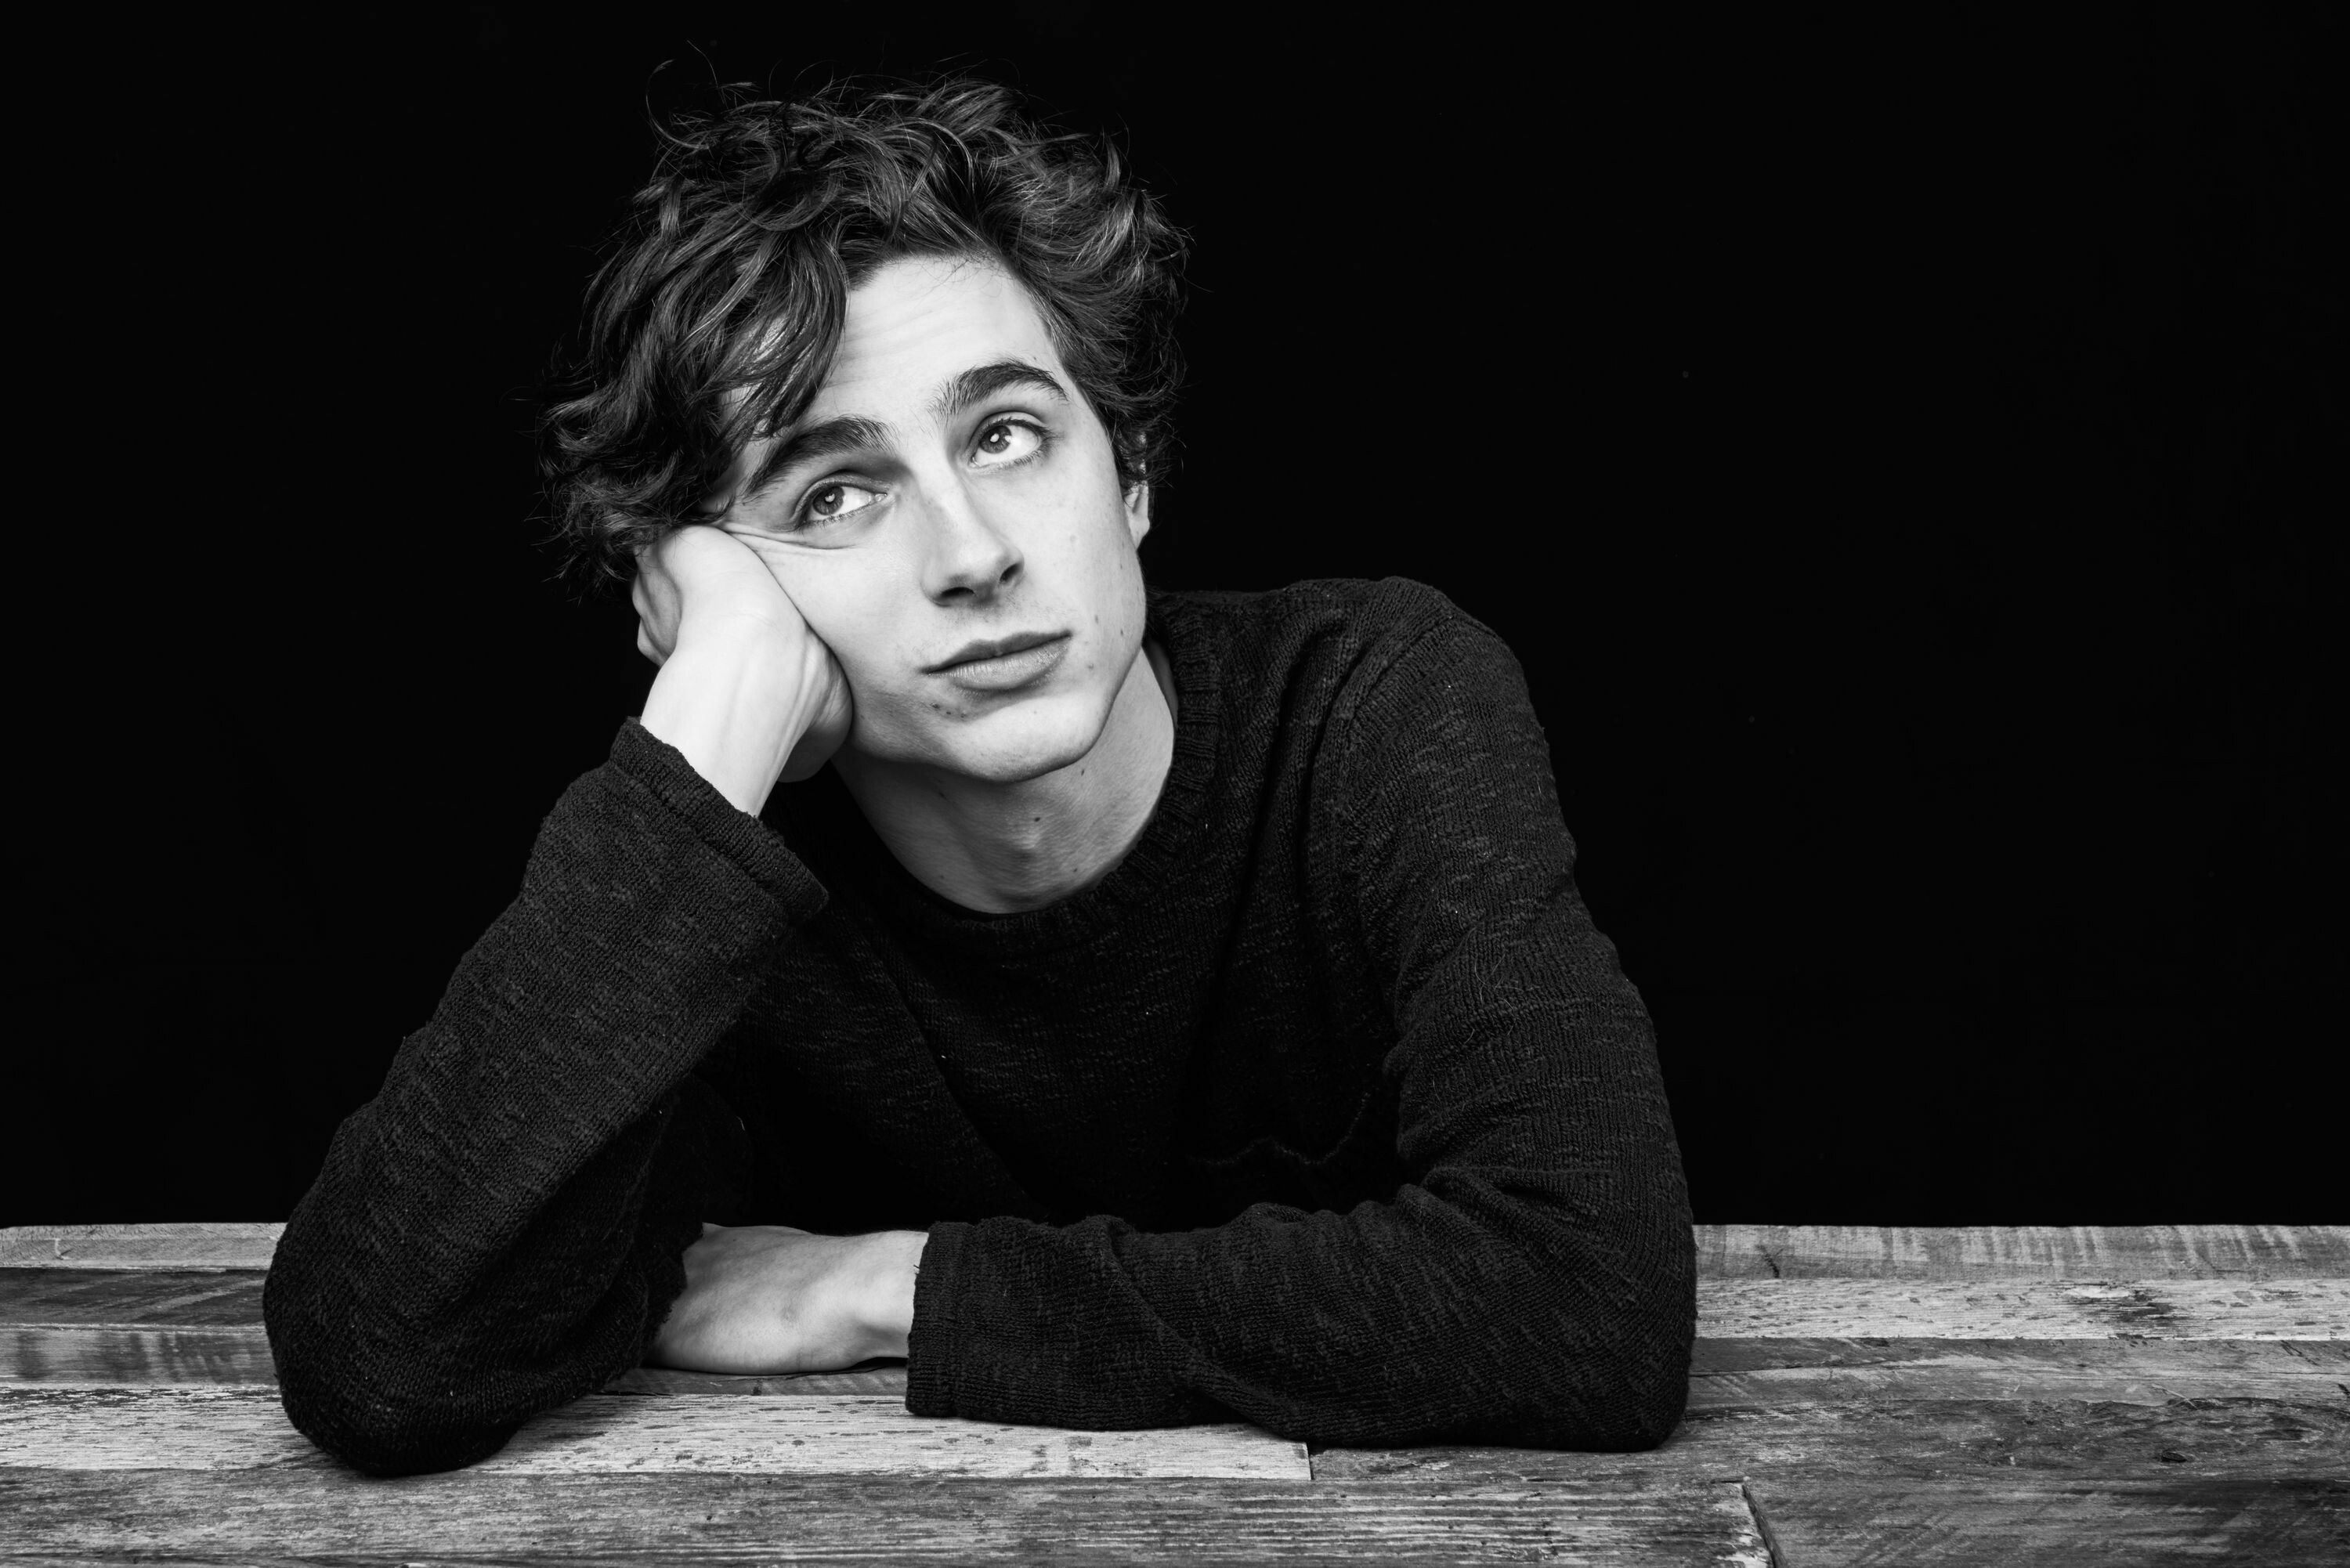 Timothee Chalamet: Played Finn Walden, the rebellious son of the Vice President in TV series Homeland. 3000x2010 HD Wallpaper.